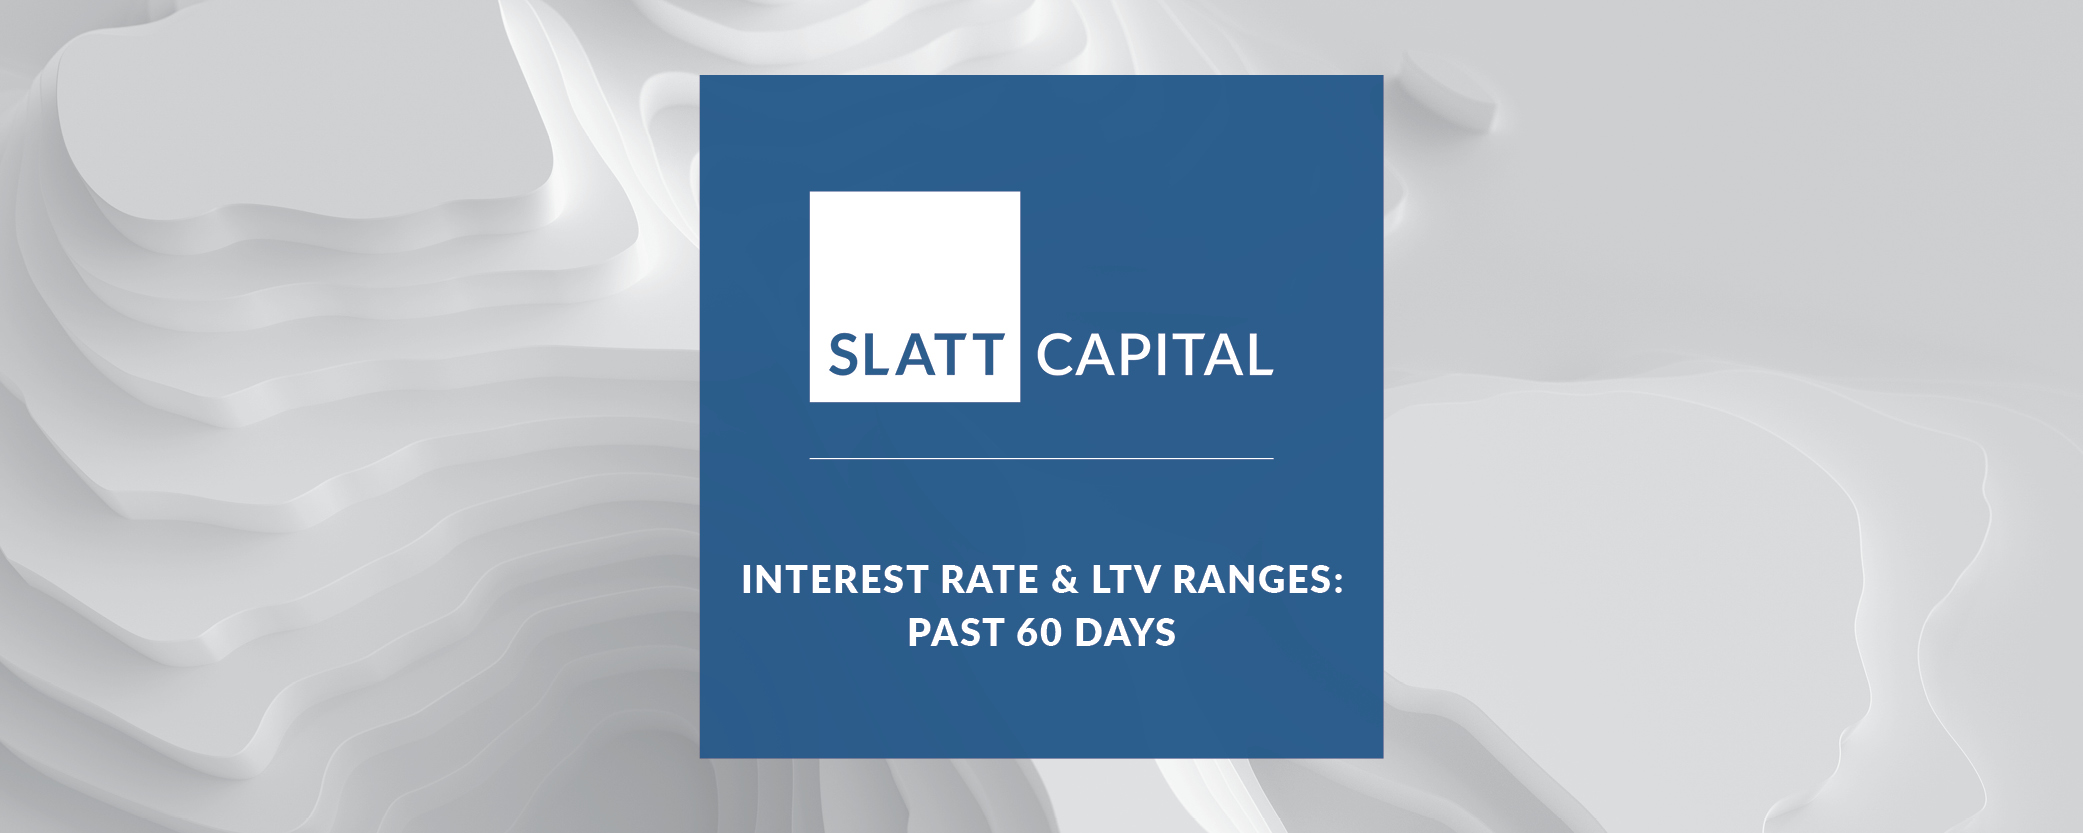 CRE interest rate and ltv ranges: past 60 days